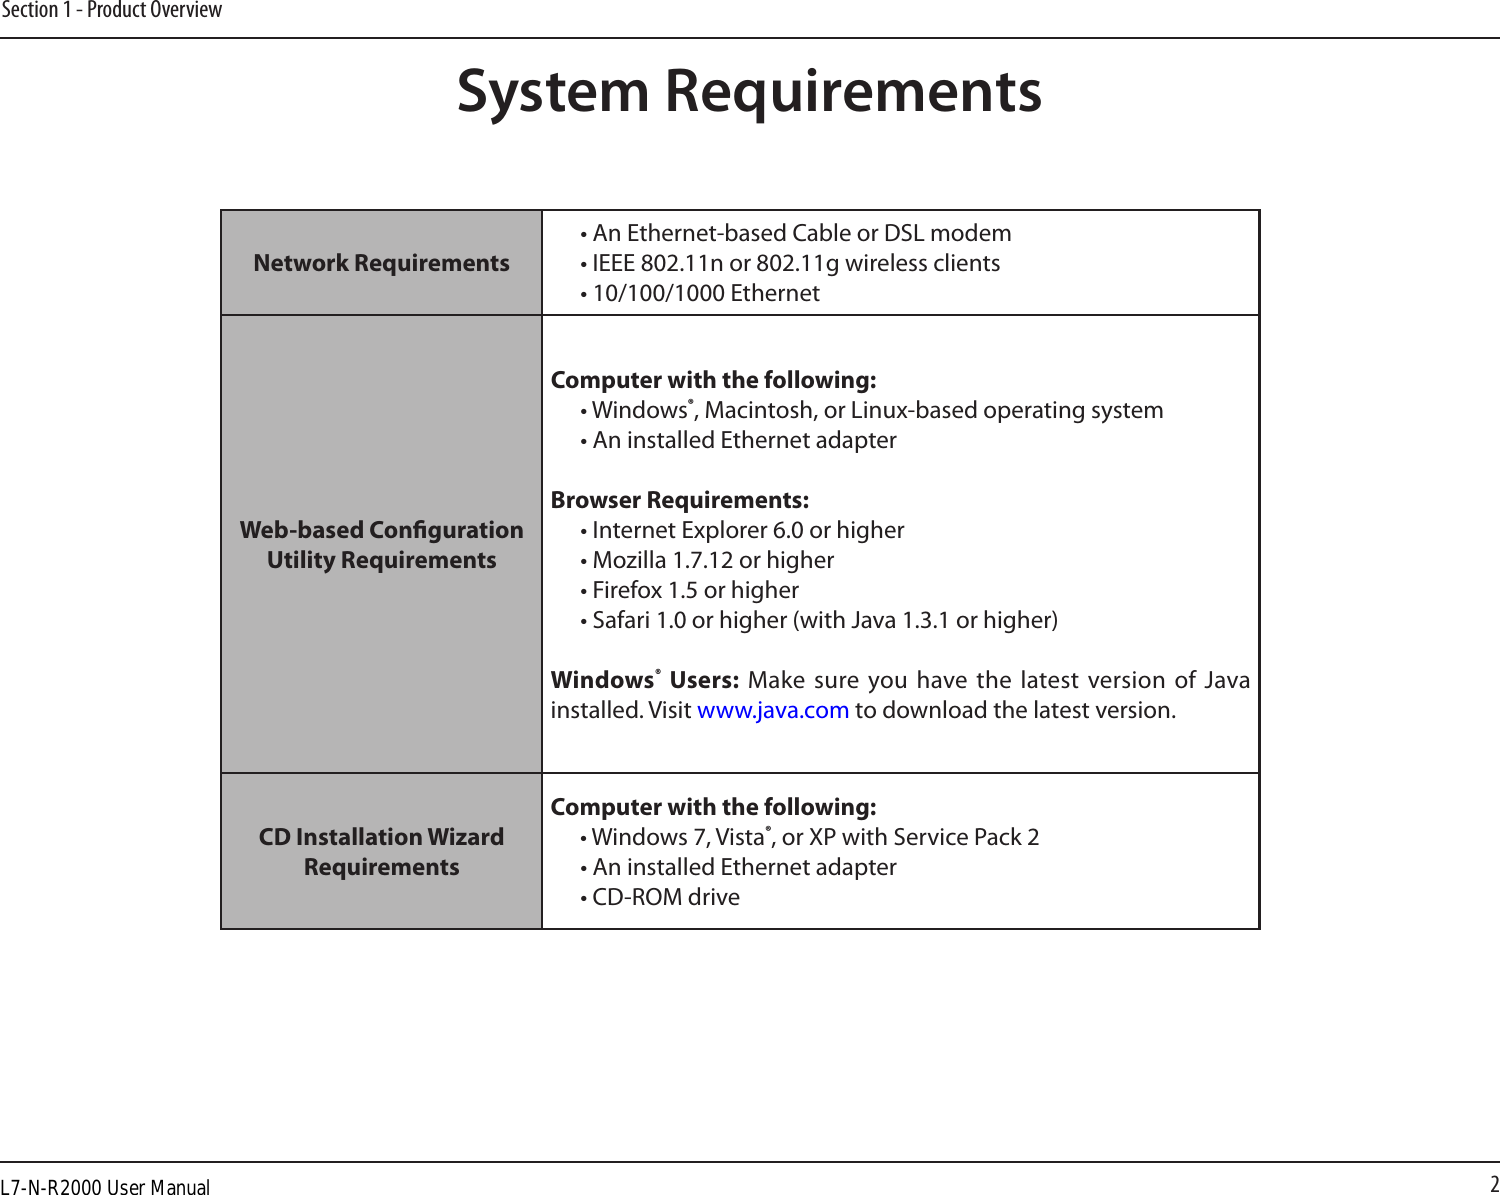 2Section 1 - Product OverviewSystem RequirementsNetwork Requirements• An Ethernet-based Cable or DSL modem• IEEE 802.11n or 802.11g wireless clients• 10/100/1000 EthernetWeb-based Conguration Utility RequirementsComputer with the following:• Windows®, Macintosh, or Linux-based operating system • An installed Ethernet adapterBrowser Requirements:• Internet Explorer 6.0 or higher• Mozilla 1.7.12 or higher• Firefox 1.5 or higher• Safari 1.0 or higher (with Java 1.3.1 or higher) Windows®  Users: Make  sure you have  the latest version of  Java installed. Visit www.java.com to download the latest version.CD Installation Wizard RequirementsComputer with the following:• Windows 7, Vista®, or XP with Service Pack 2• An installed Ethernet adapter• CD-ROM driveL7-N-R2000 User Manual